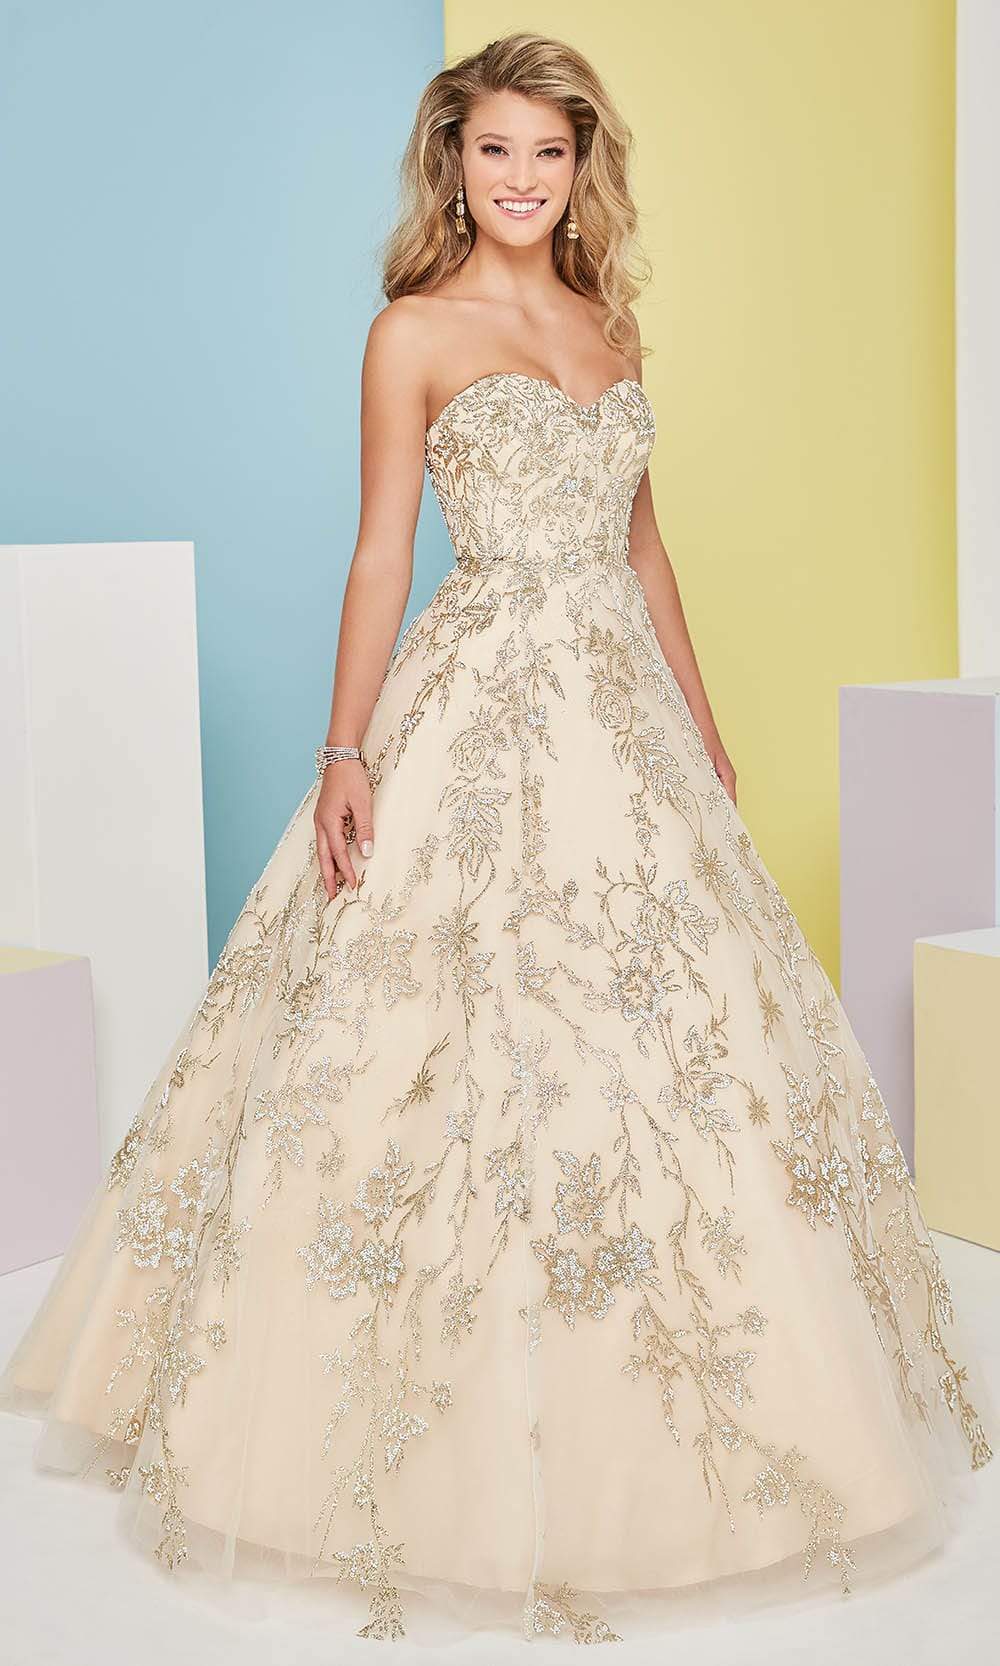 Tiffany Designs - 16471 Strapless Floral Glitter Ornate A-Line Gown Prom Dresses 0 / Champagne